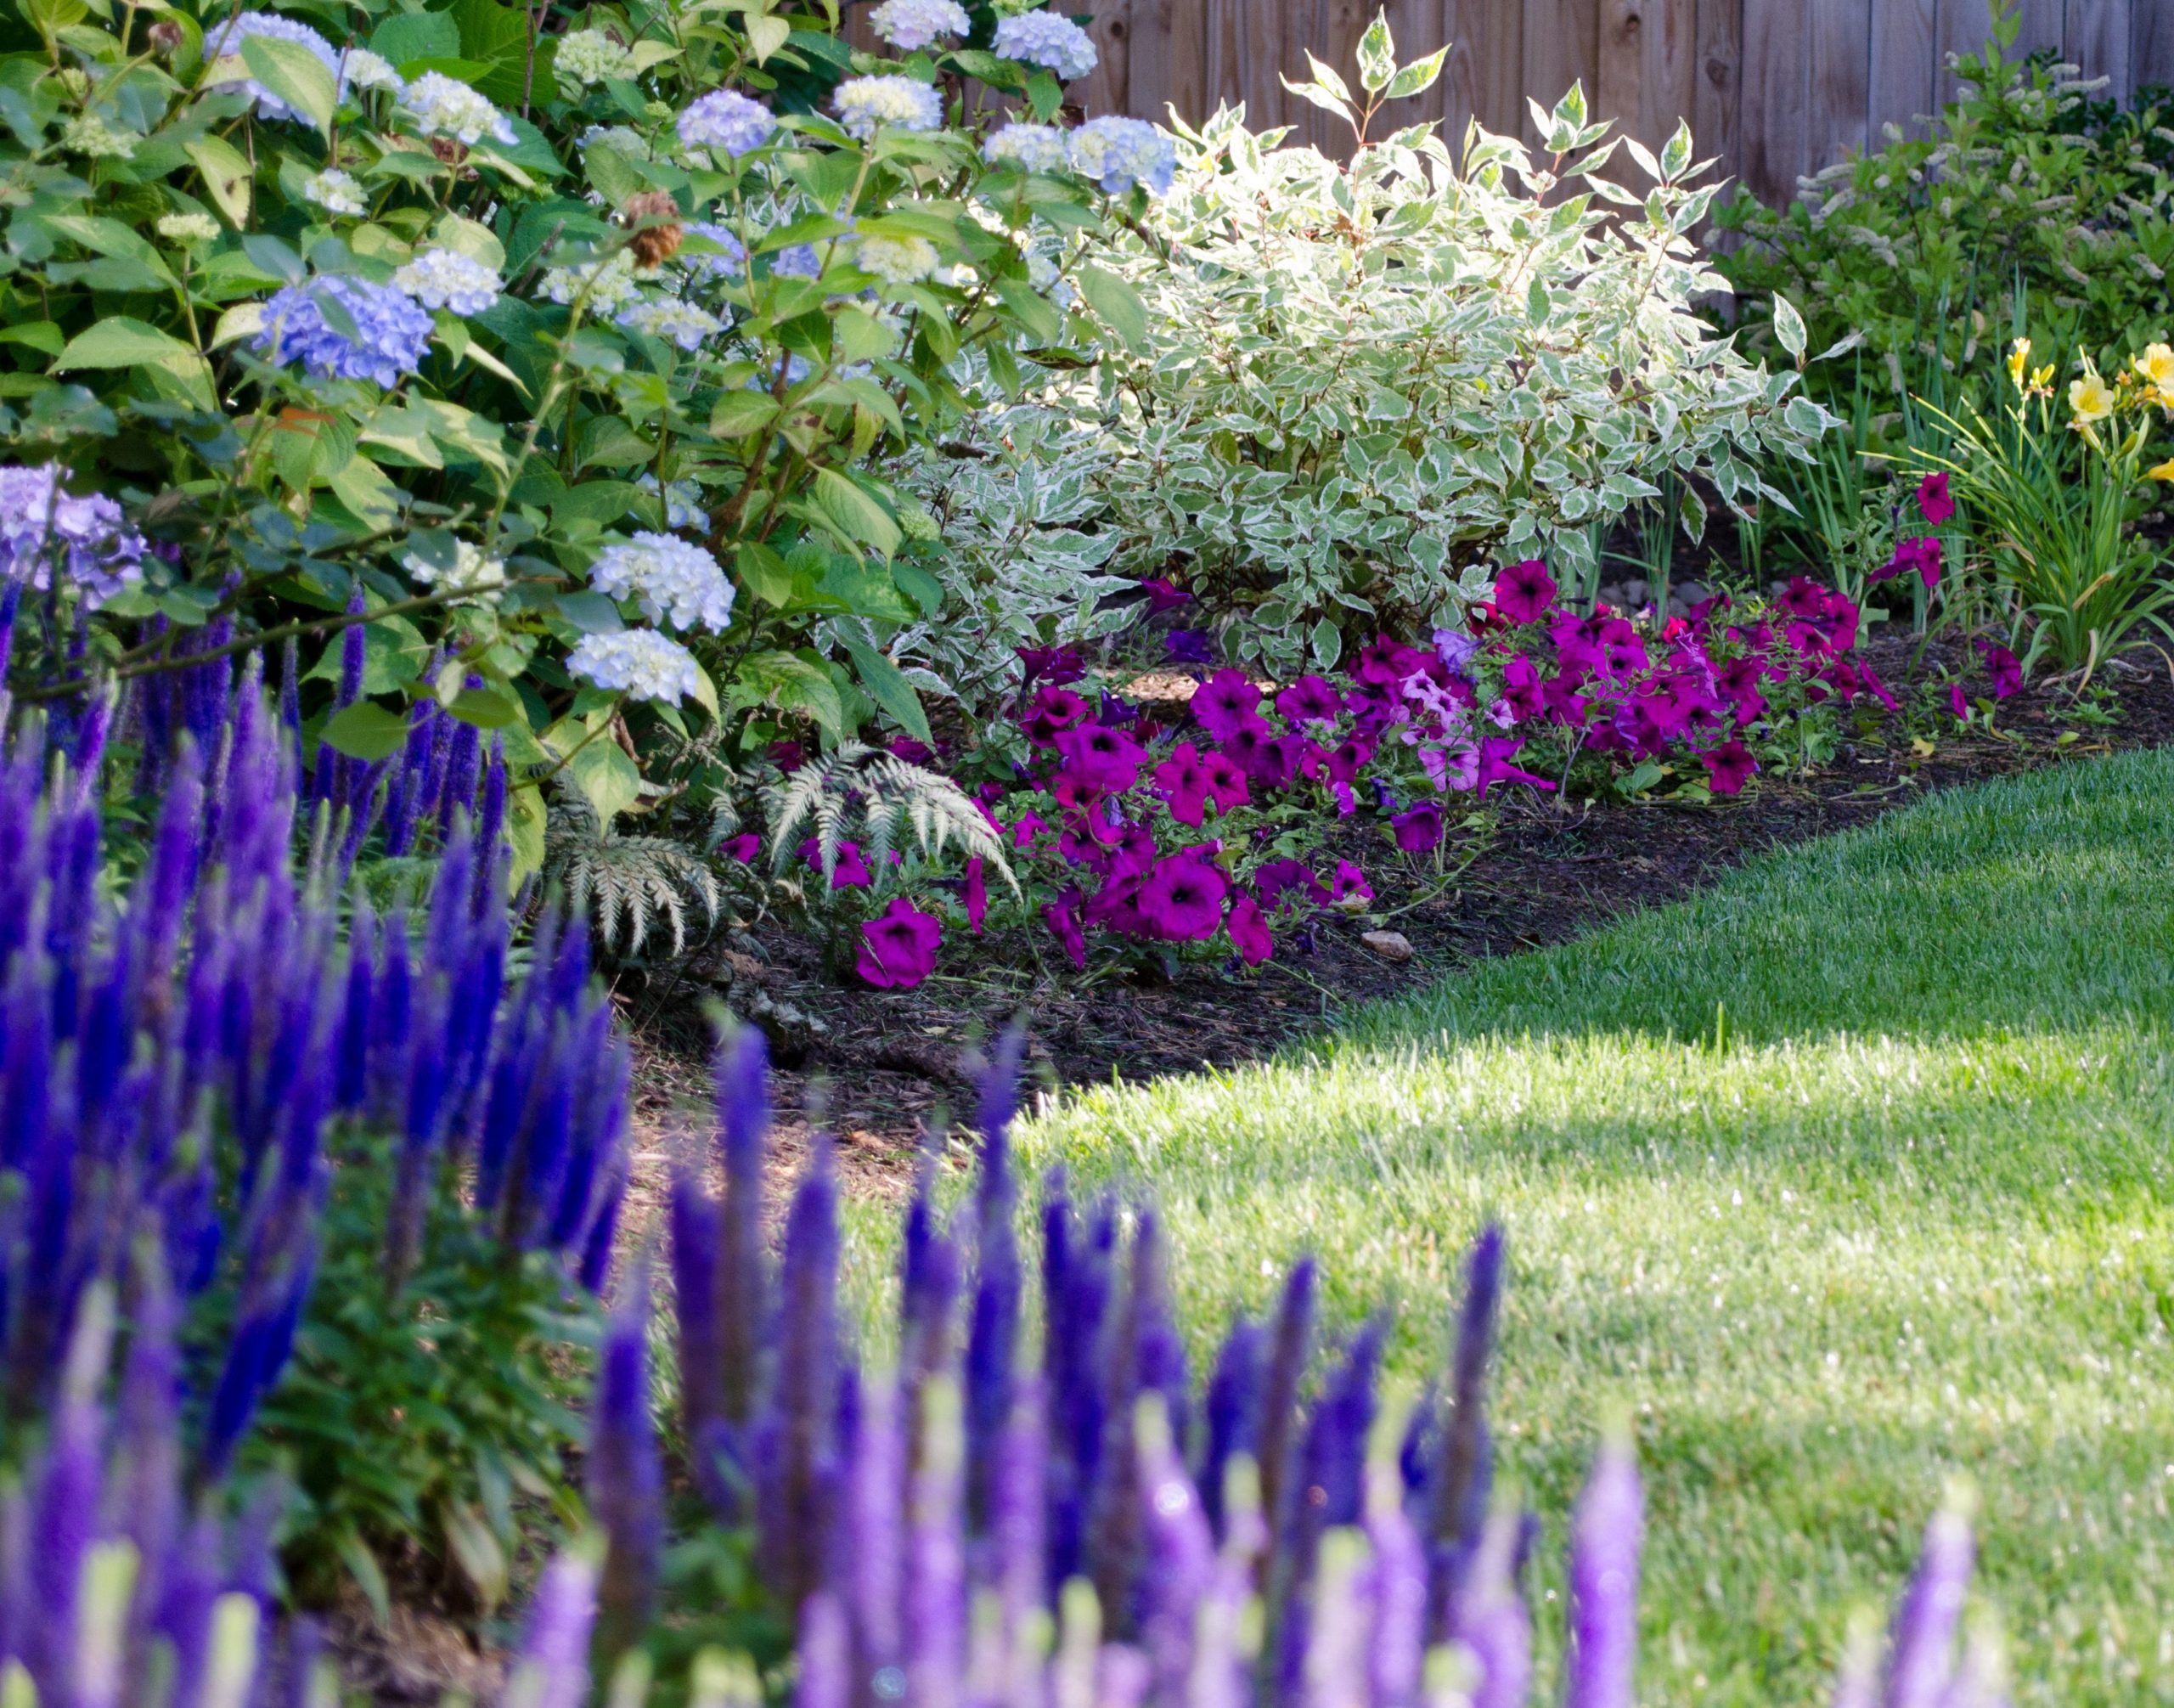 A picturesque garden featuring a delightful blend of blue and purple flowers, adding a touch of elegance to the surroundings.